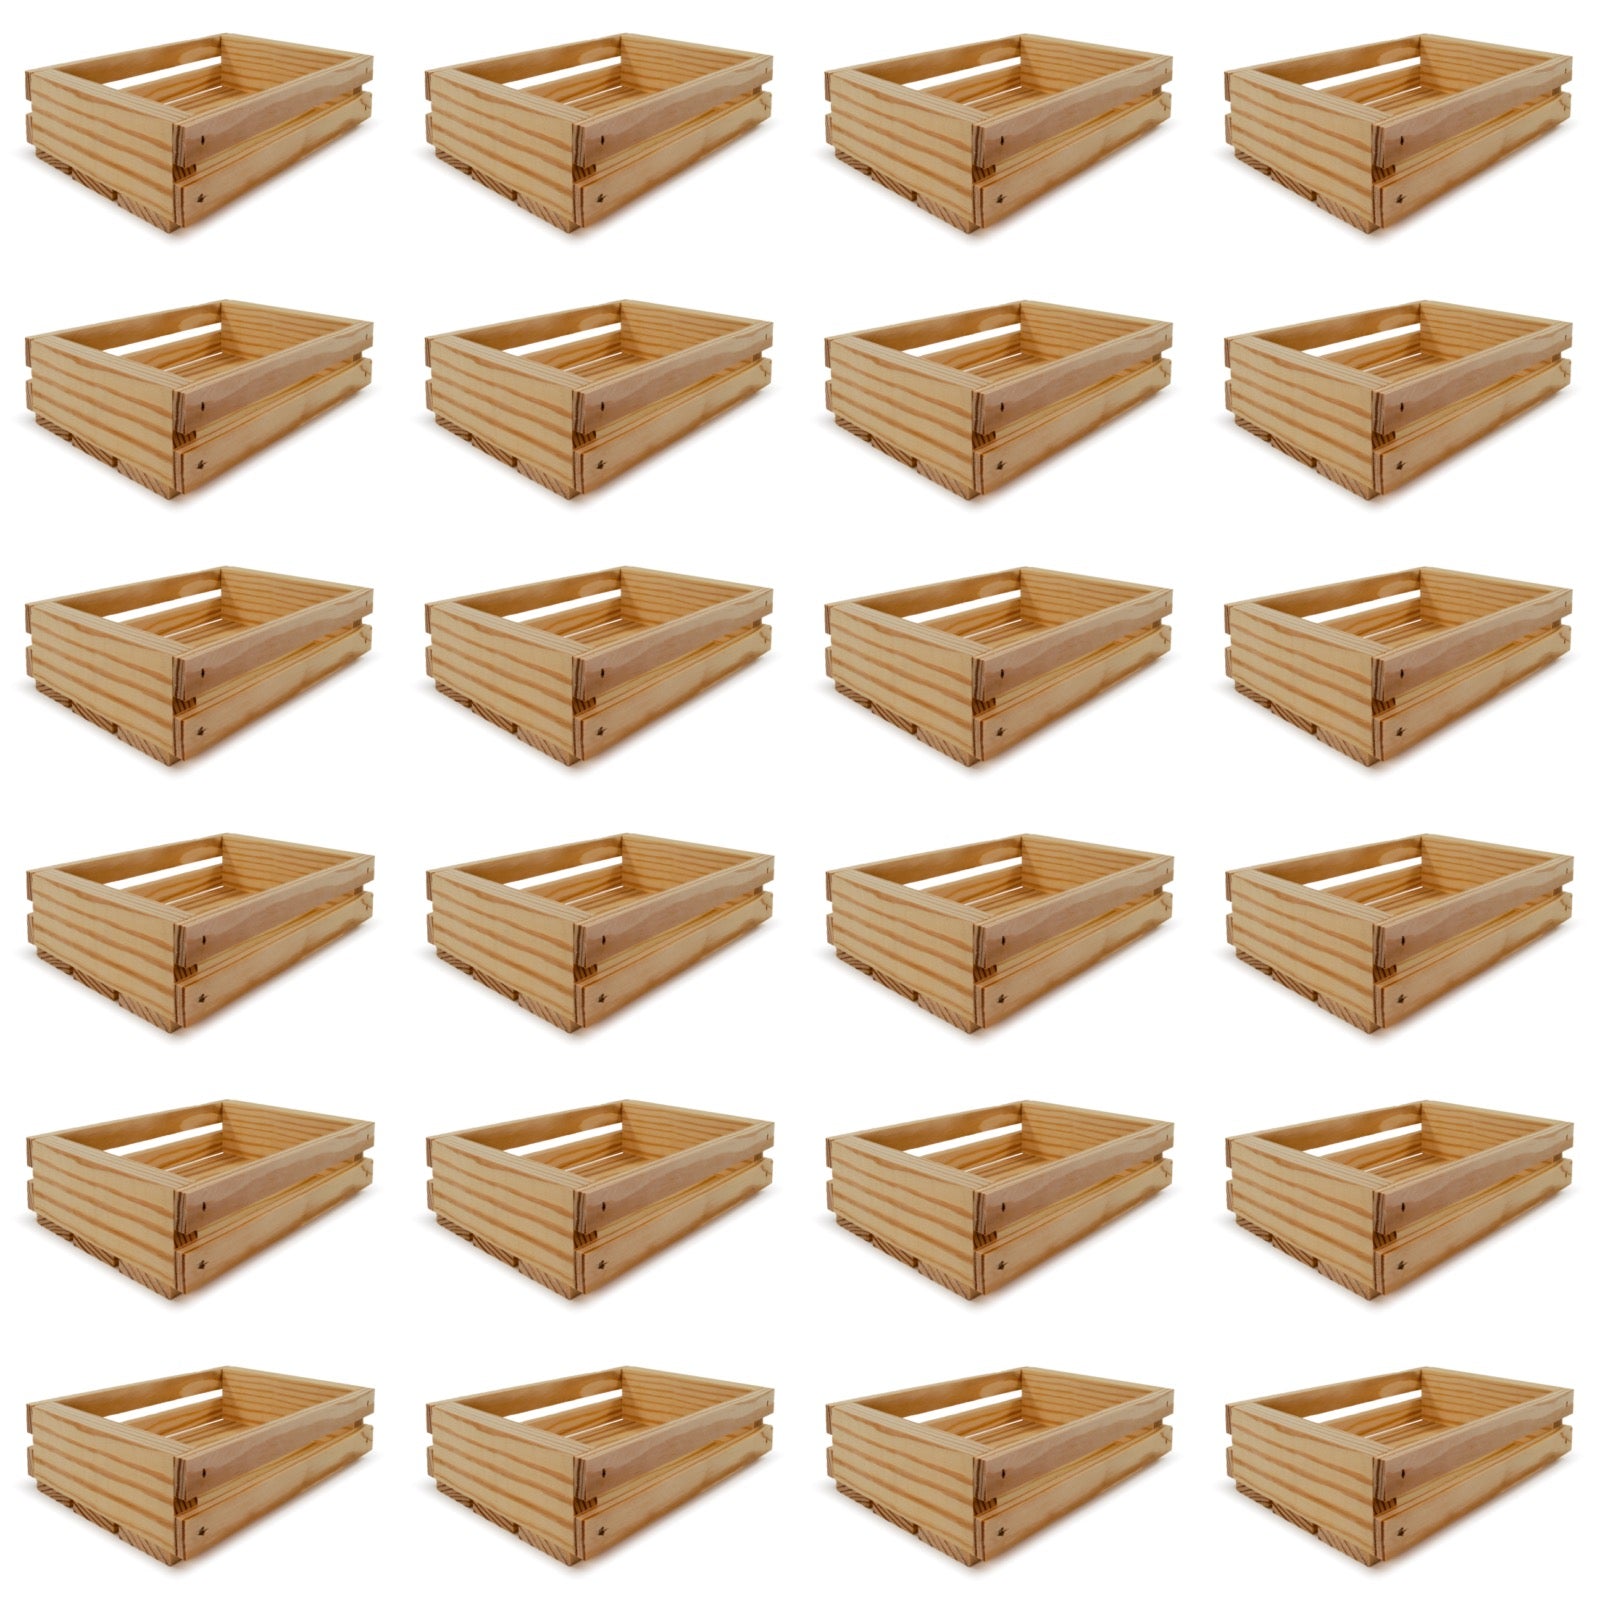 24 Small wooden crates 8x6x2.5